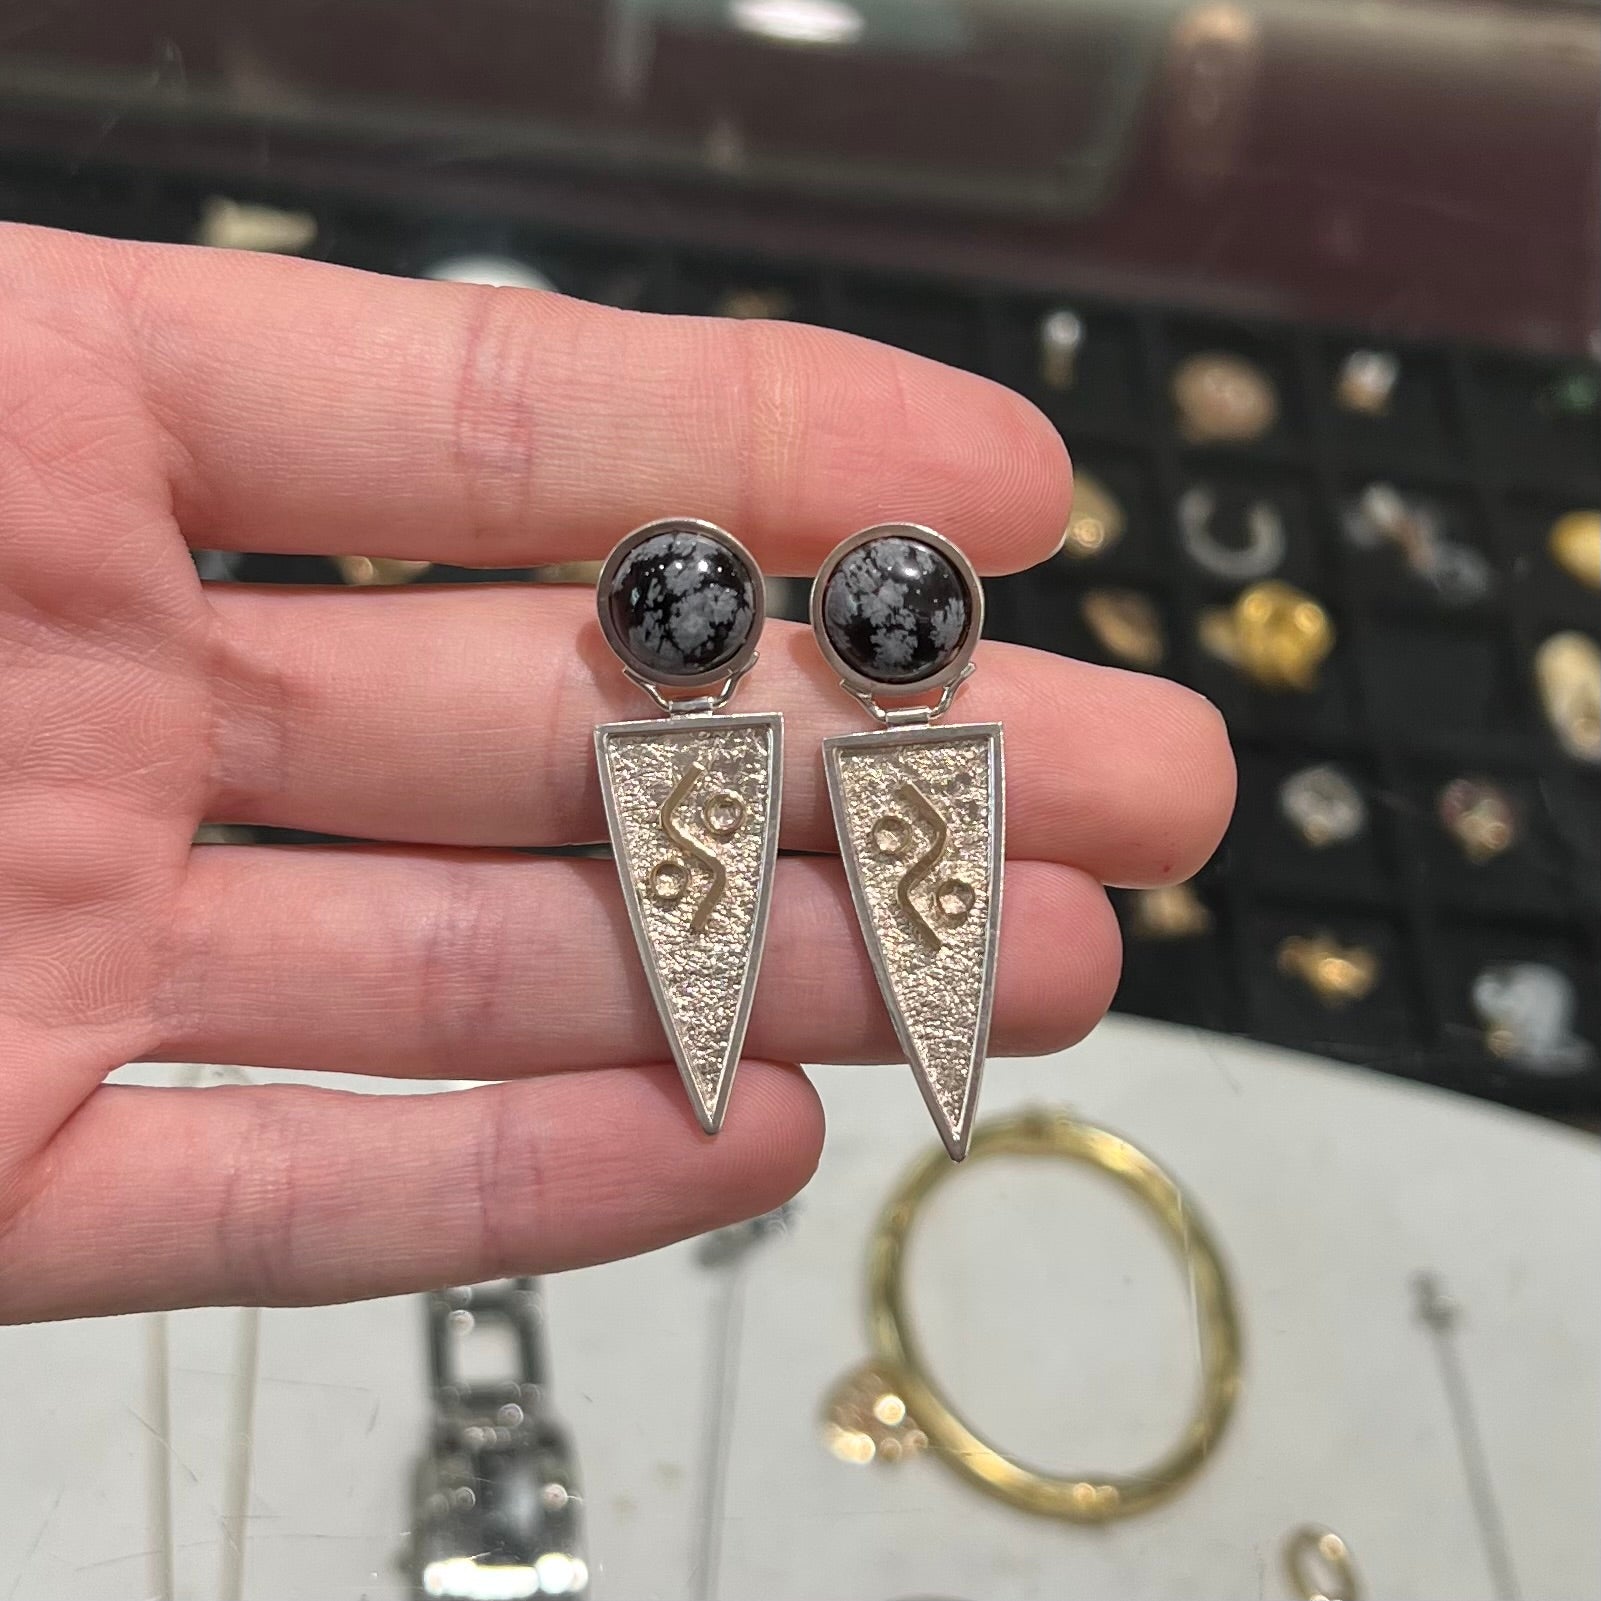 A pair of two-tone silver and gold snowflake obsidian earrings handmade by Zuni artist, Myron Panteah.